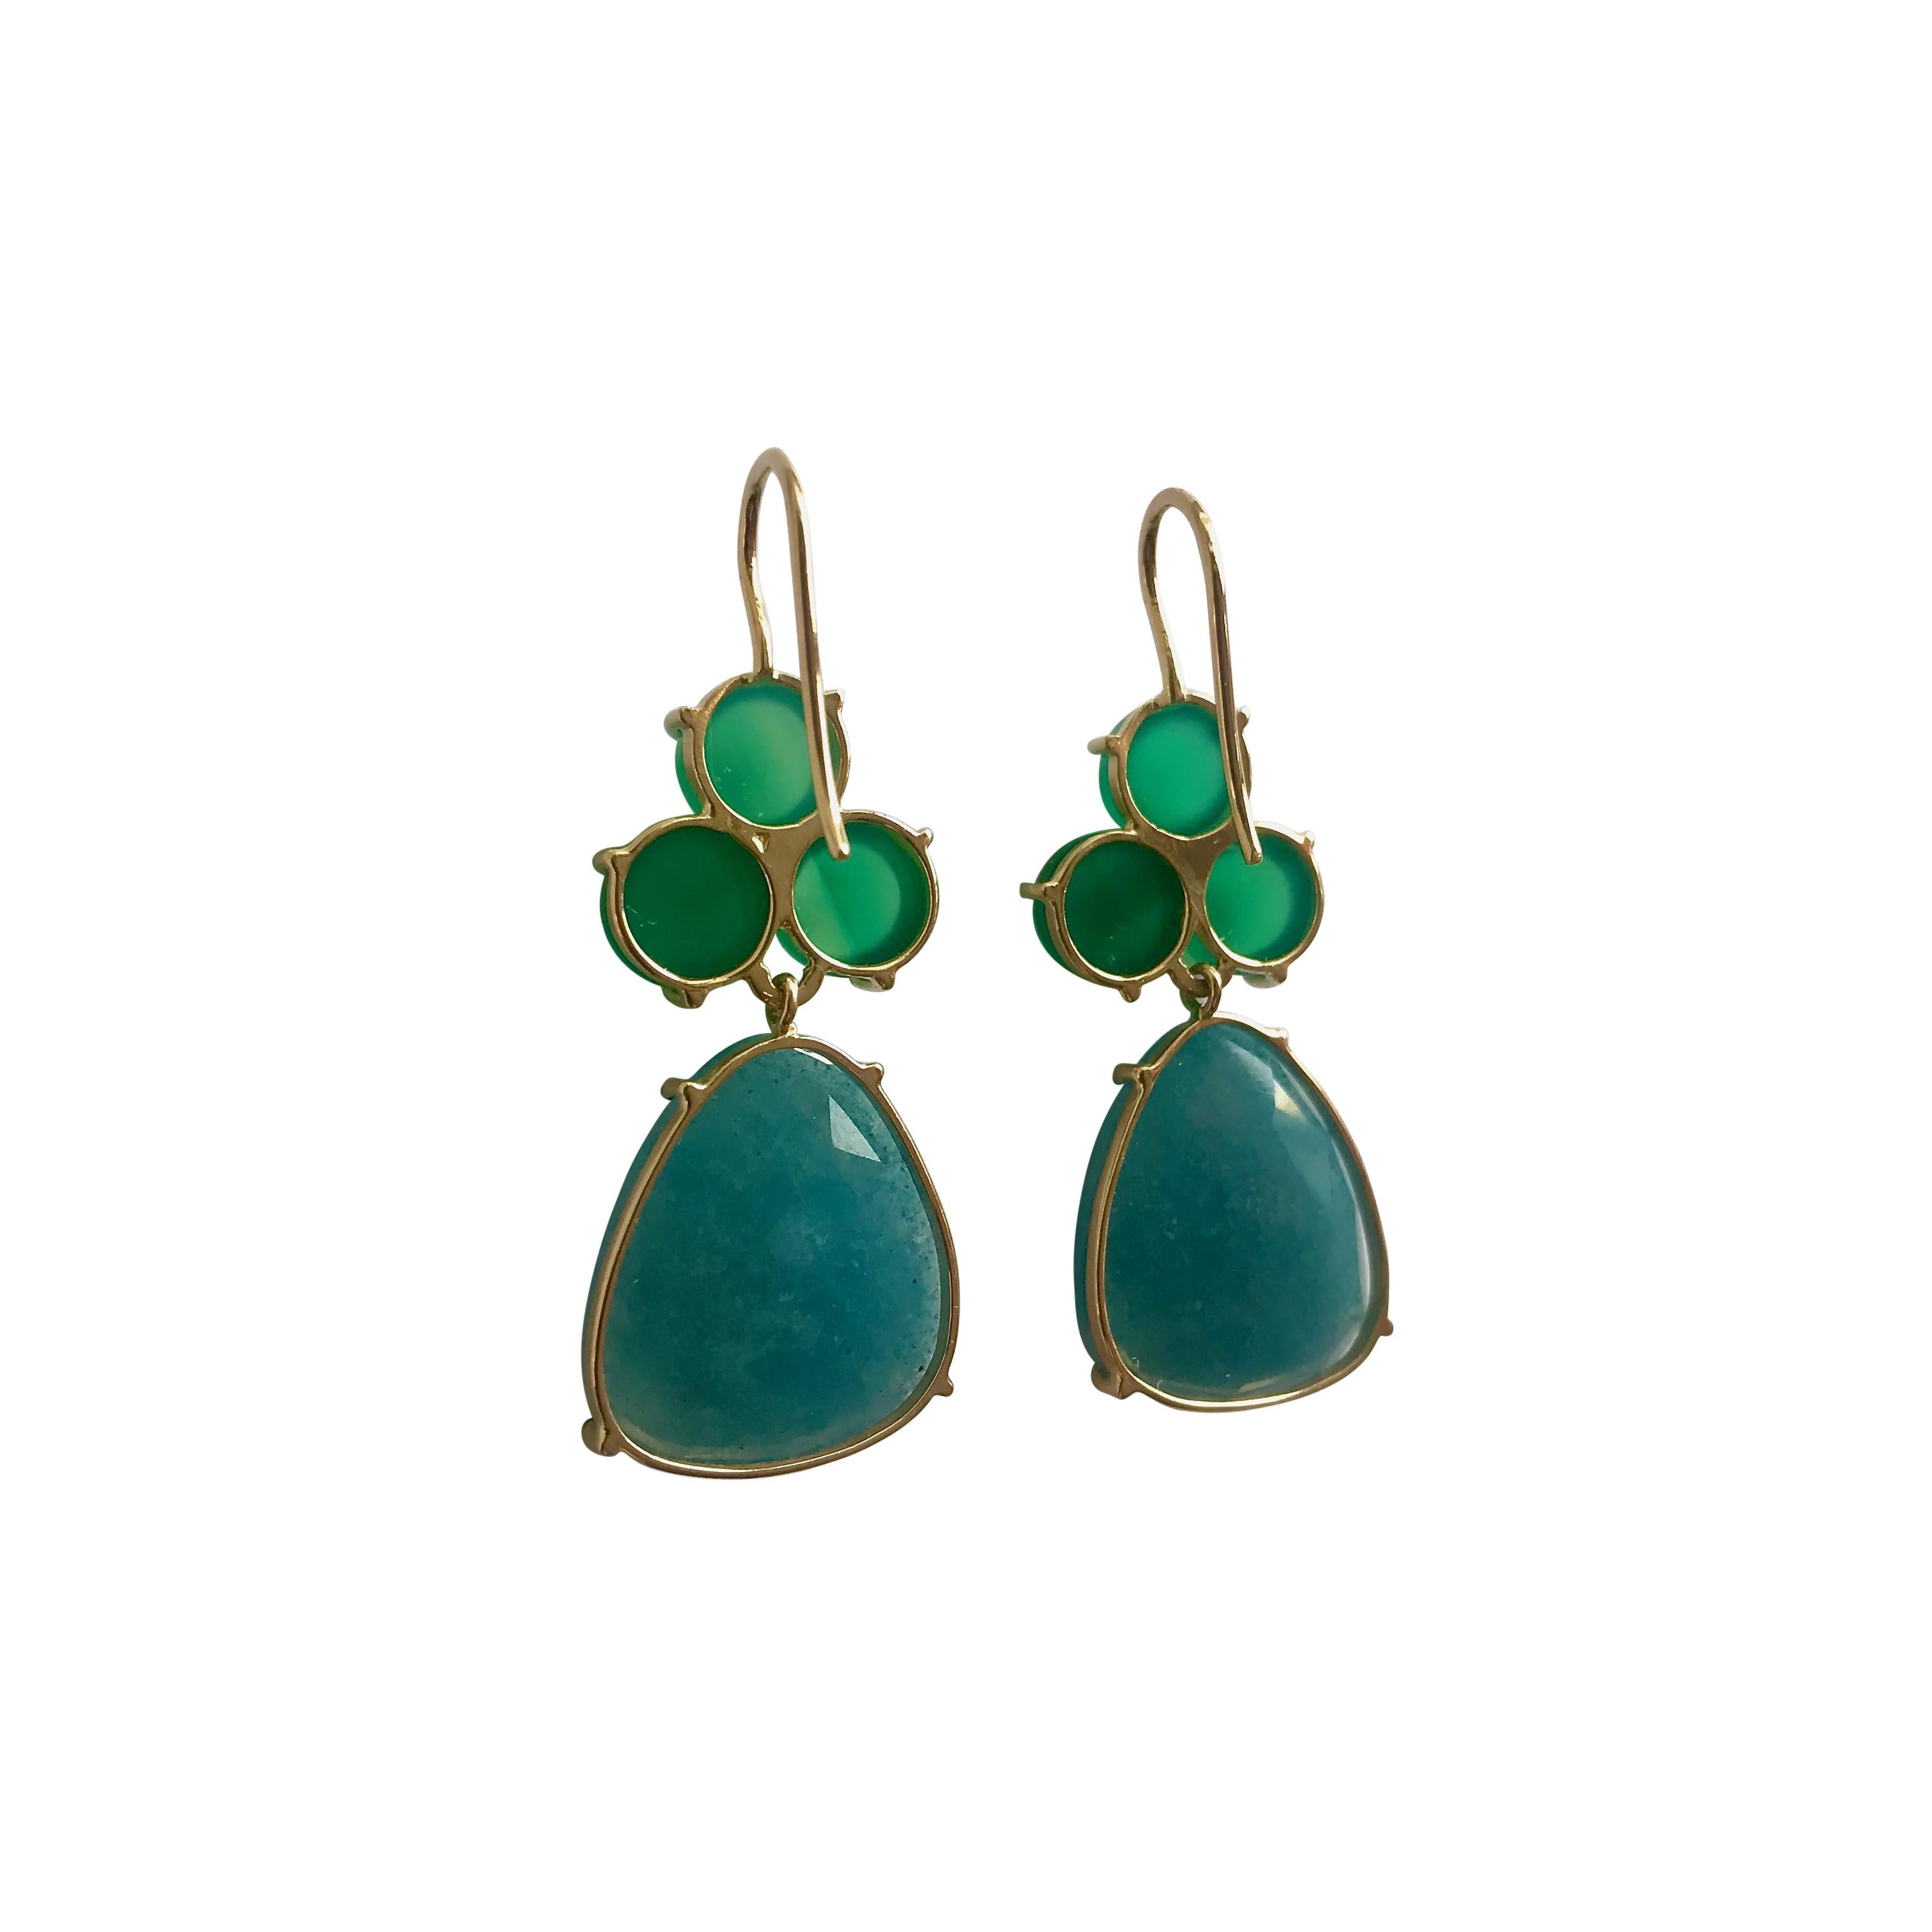 These handcrafted earrings are made of 18 Karat solid yellow gold, rose-cut blue quartz and cabochon-cut green agates.
They are easy to wear and suitable for almost any occasion.
Width:  1.70 cm
Height: 4.30 cm
Hallmarked at London Goldsmiths’